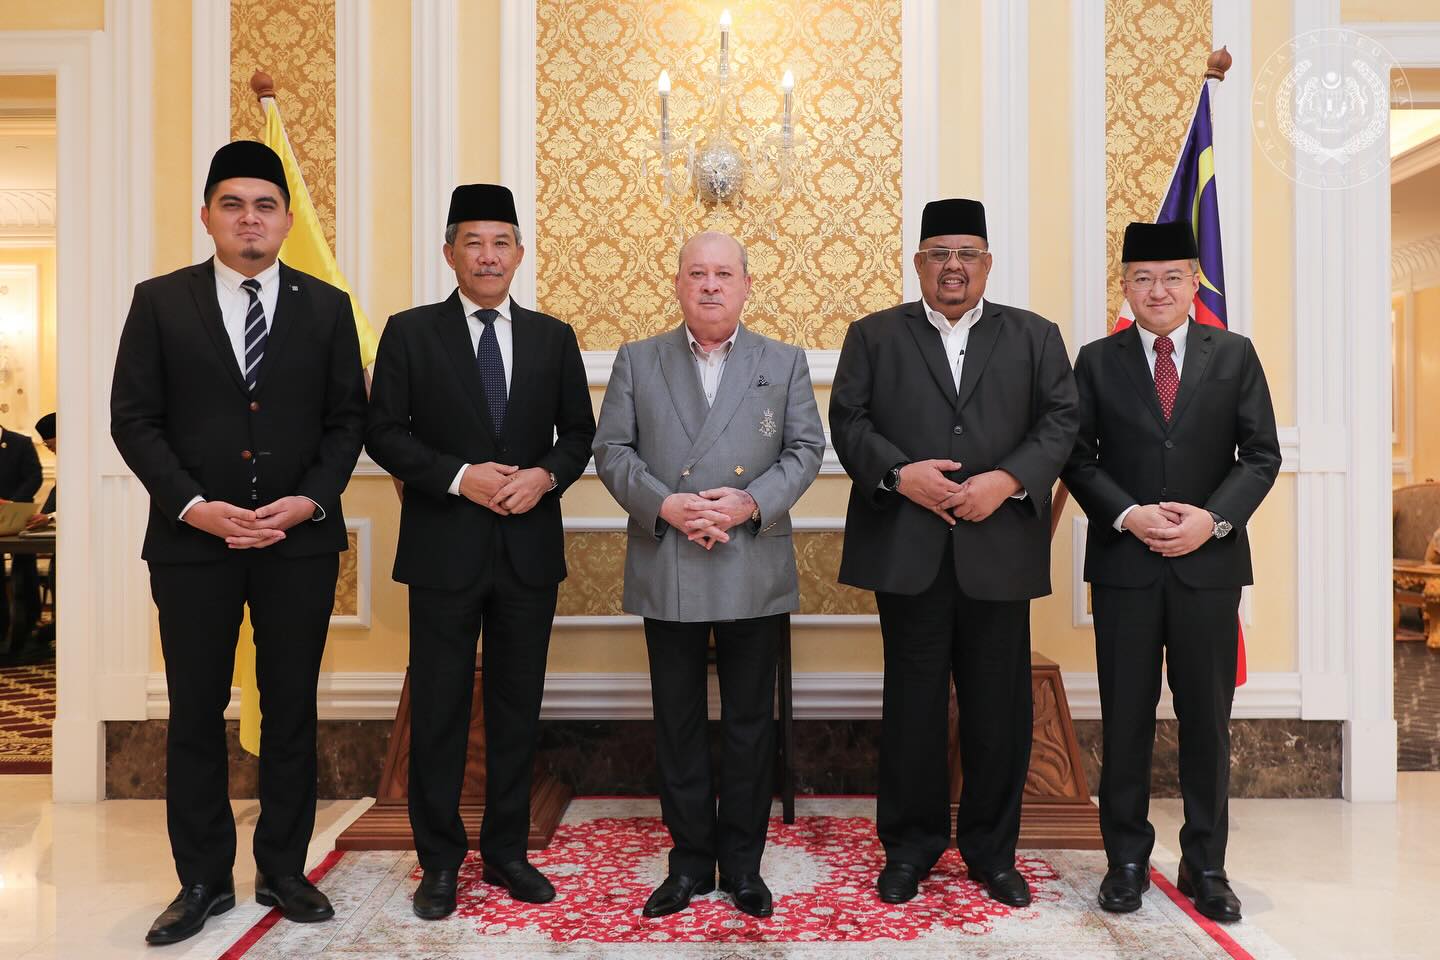 Foster unity, not division, says Agong after meeting Umno, DAP leaders